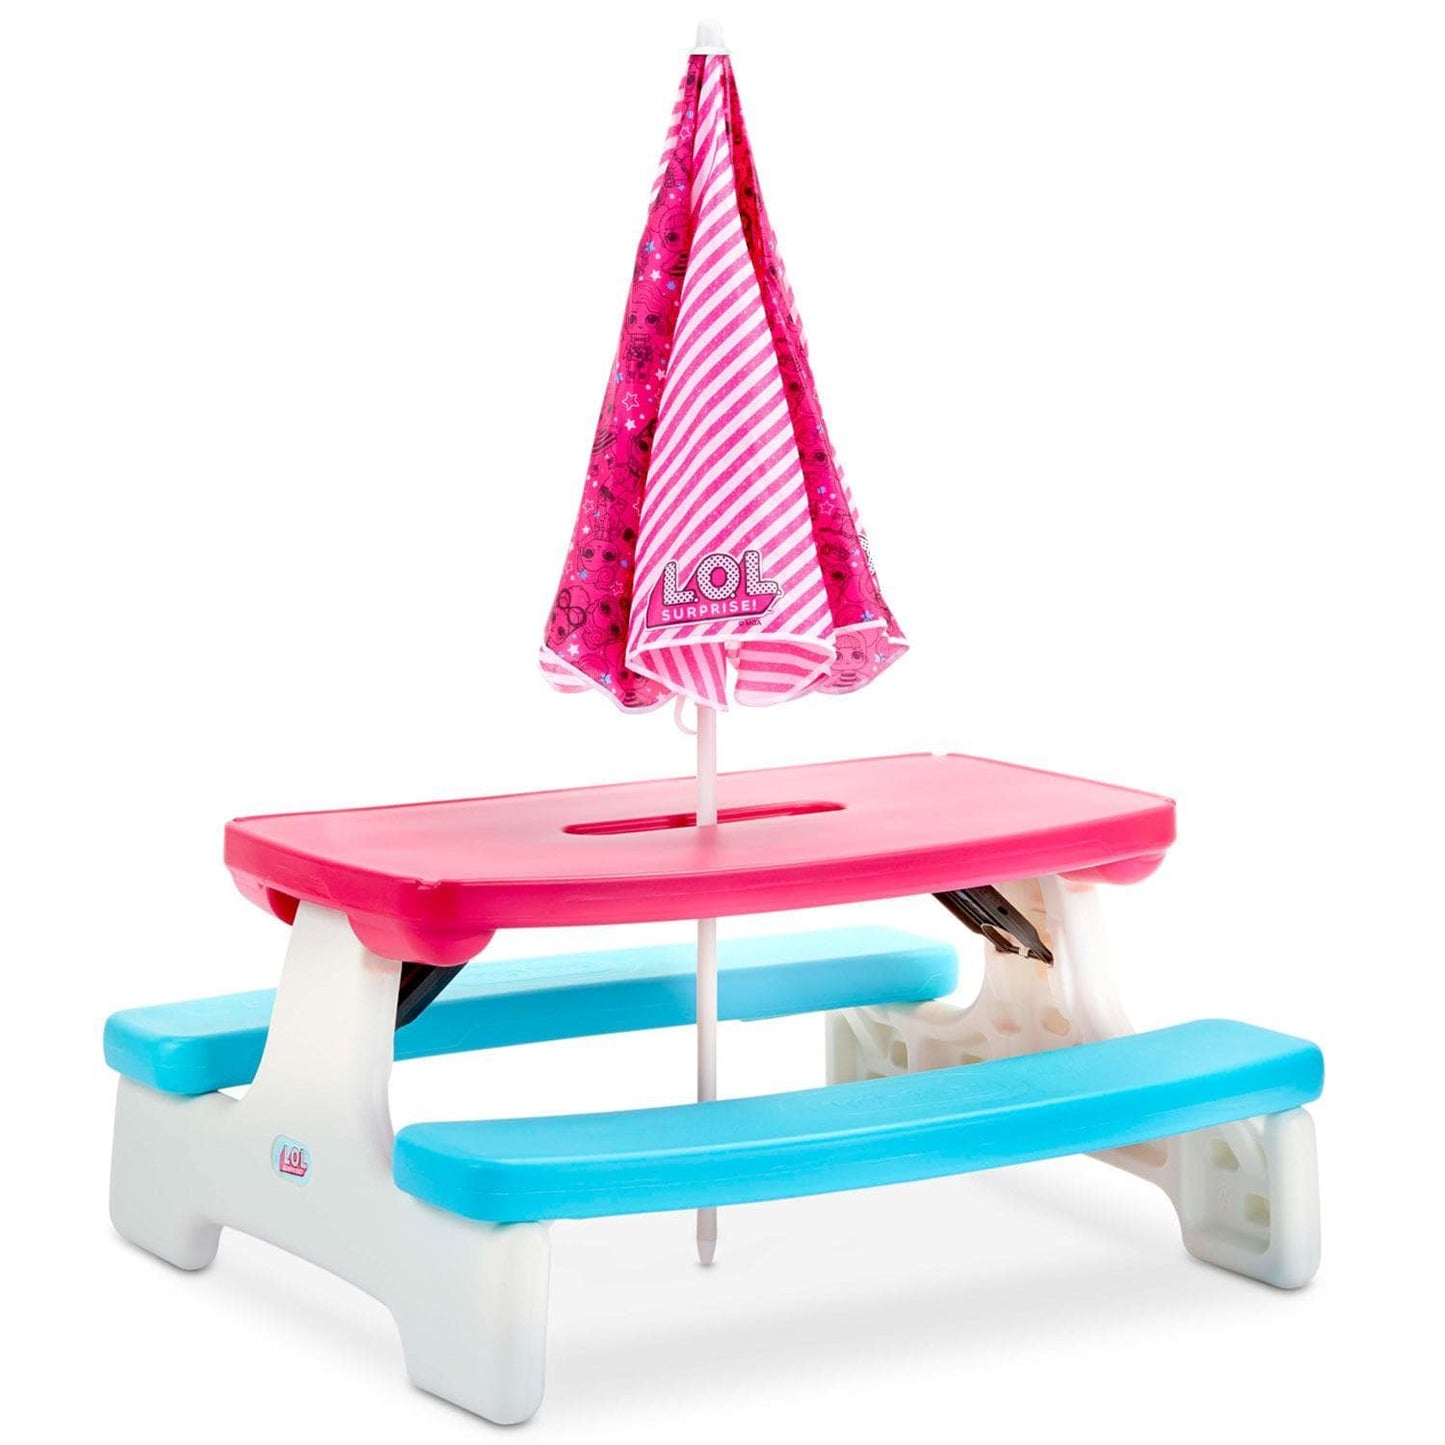 LOL Surprise Birthday Party Table with Umbrella (LIT-651656M)